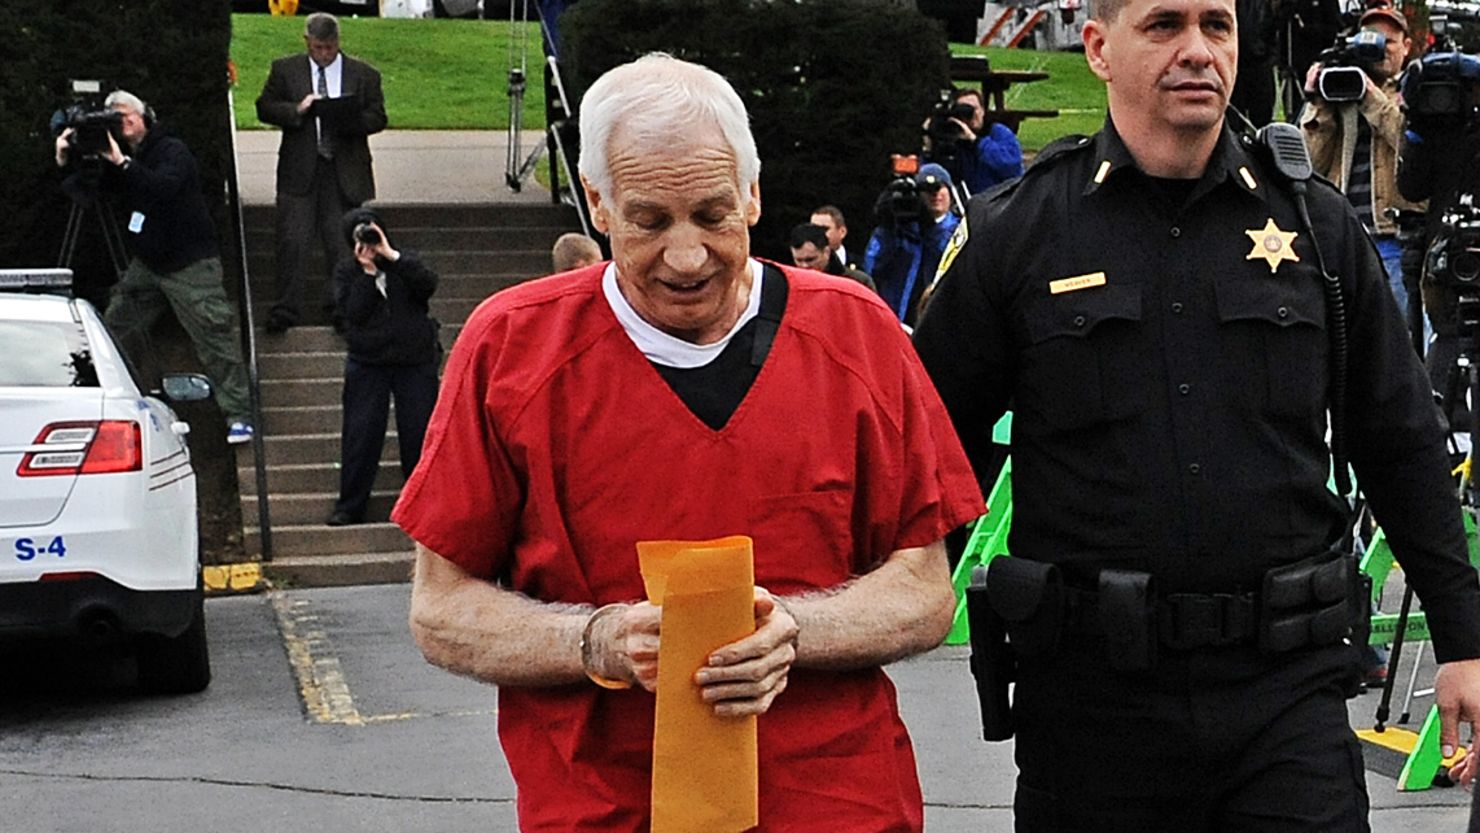 Former Penn State assistant football coach Jerry Sandusky was sentenced Tuesday to at least 30 years in prison.